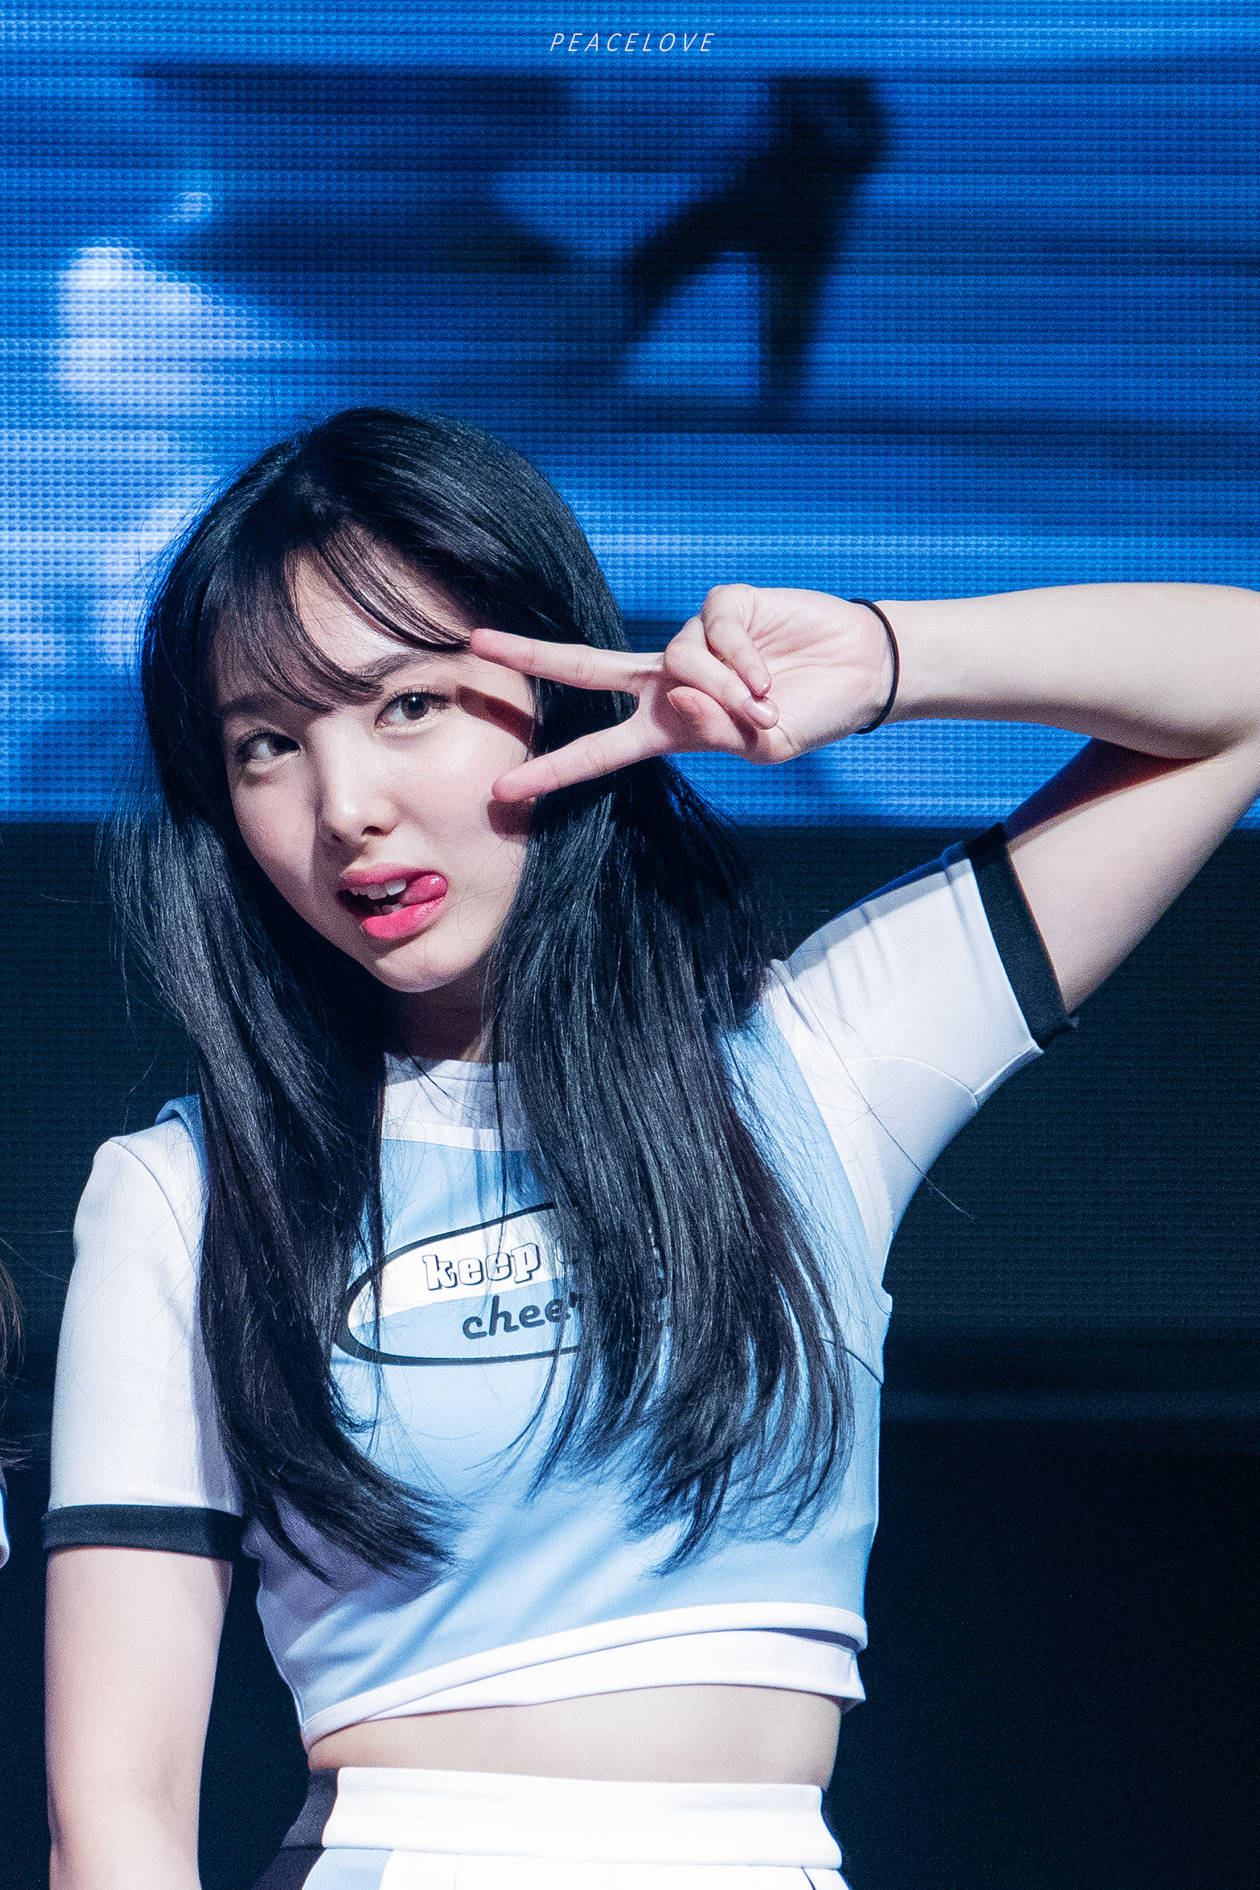 Twice Nayeon Making A Peace Sign Wallpaper